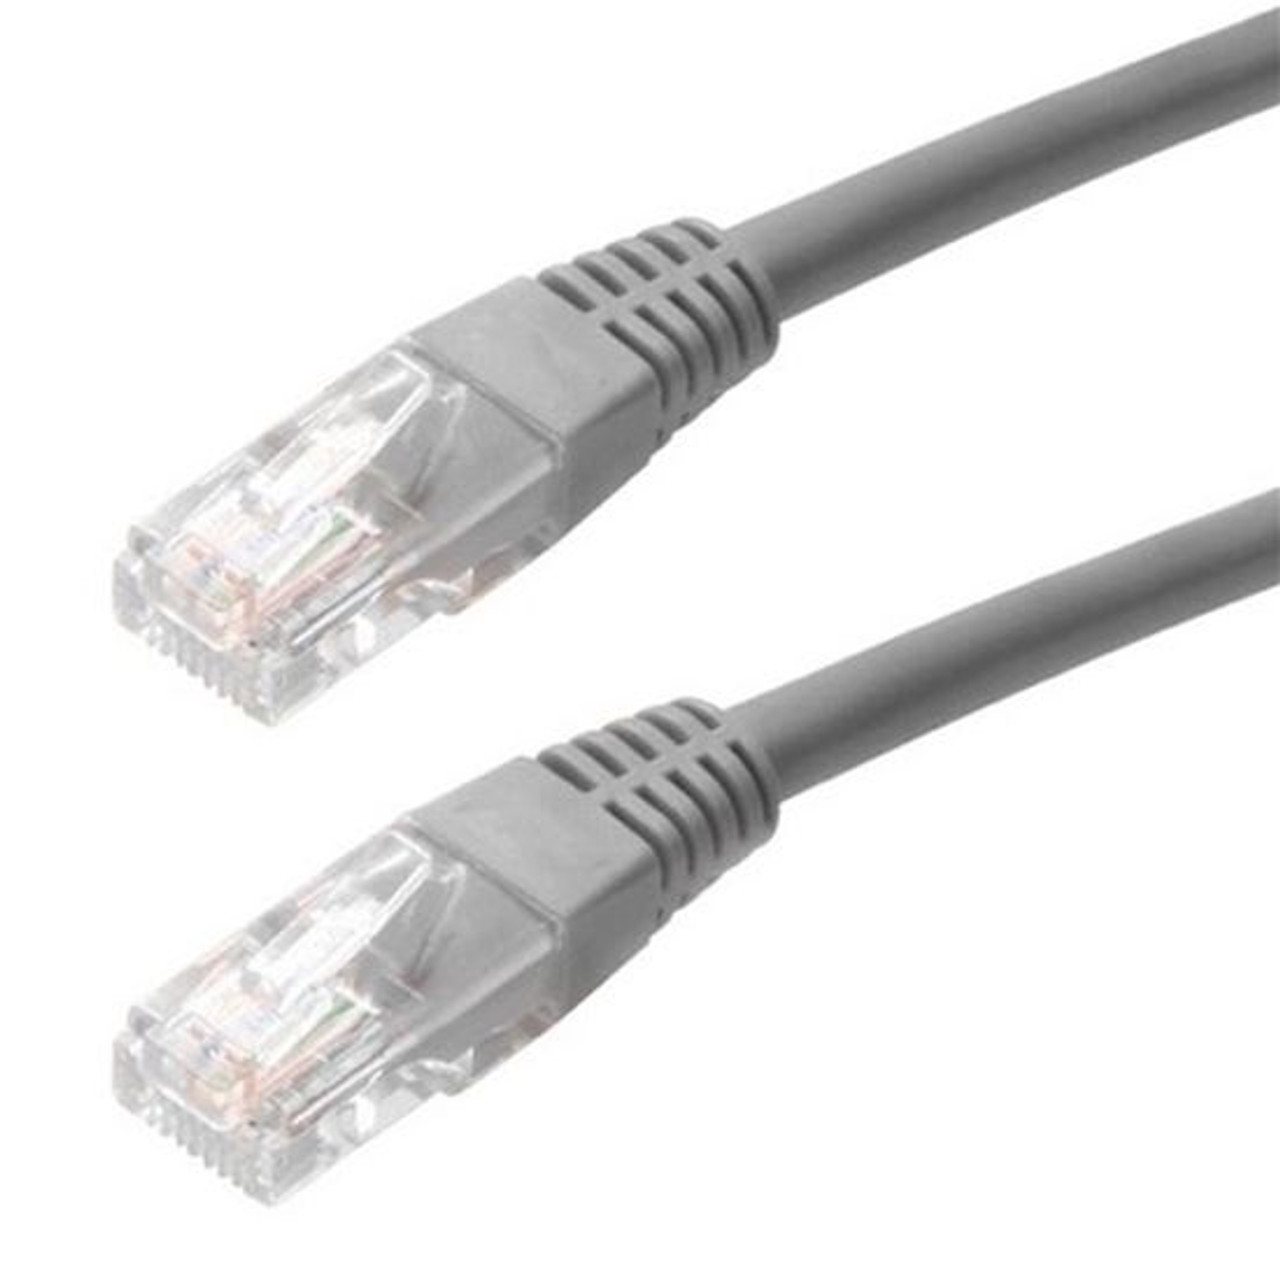 Steren 308-510GY 10FT Gray CAT5e Patch Cable UTP 350 MHz RJ45 Network 24 AWG Stranded Copper Male to Male RJ-45 Enhanced Category 5e High Speed Ethernet Data Computer Gaming Jumper, Part # 308510-GY